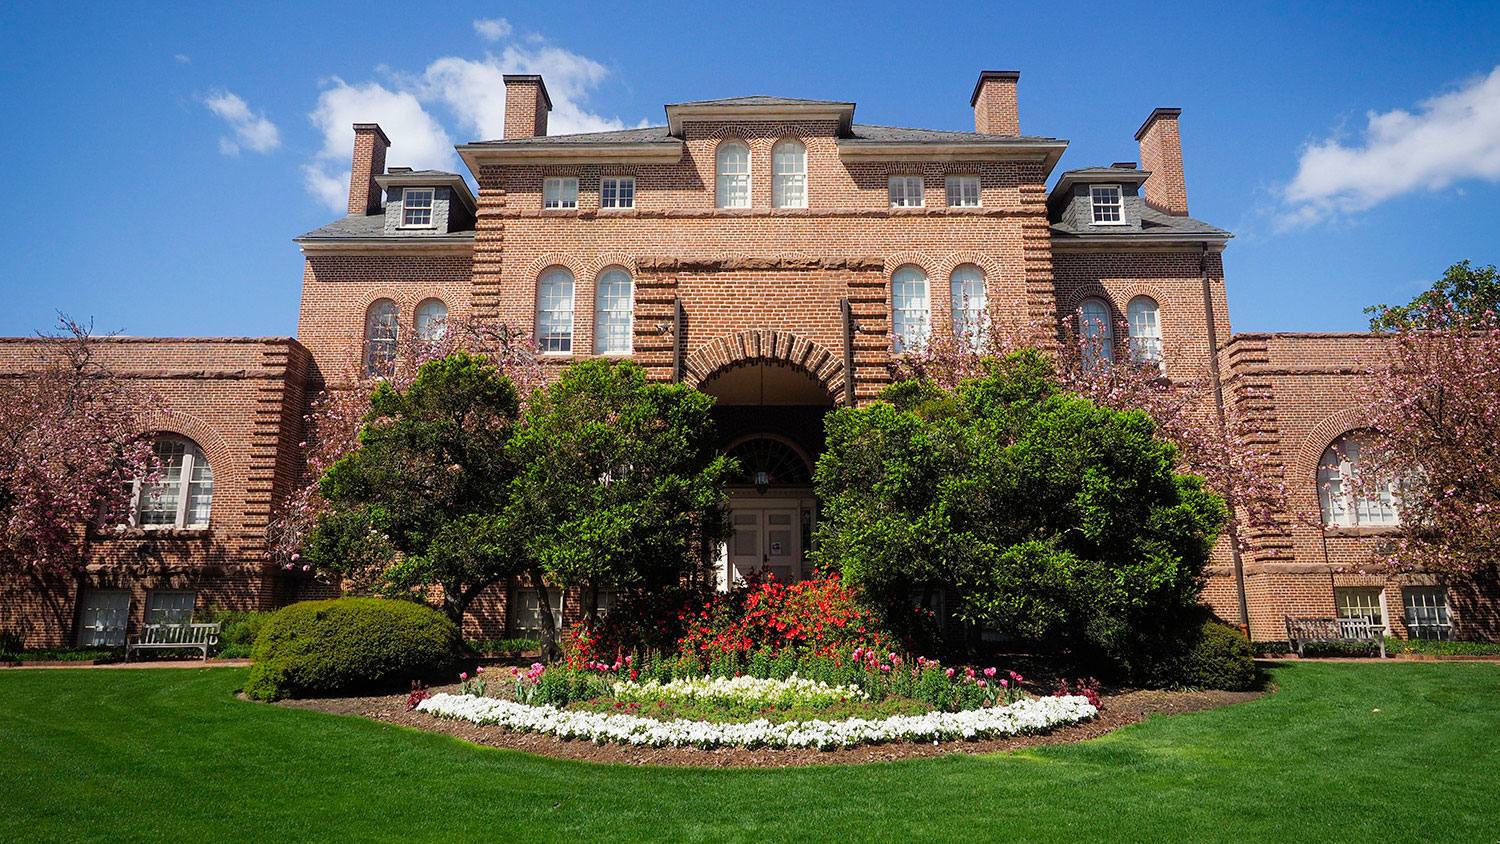 The exterior of Holladay Hall